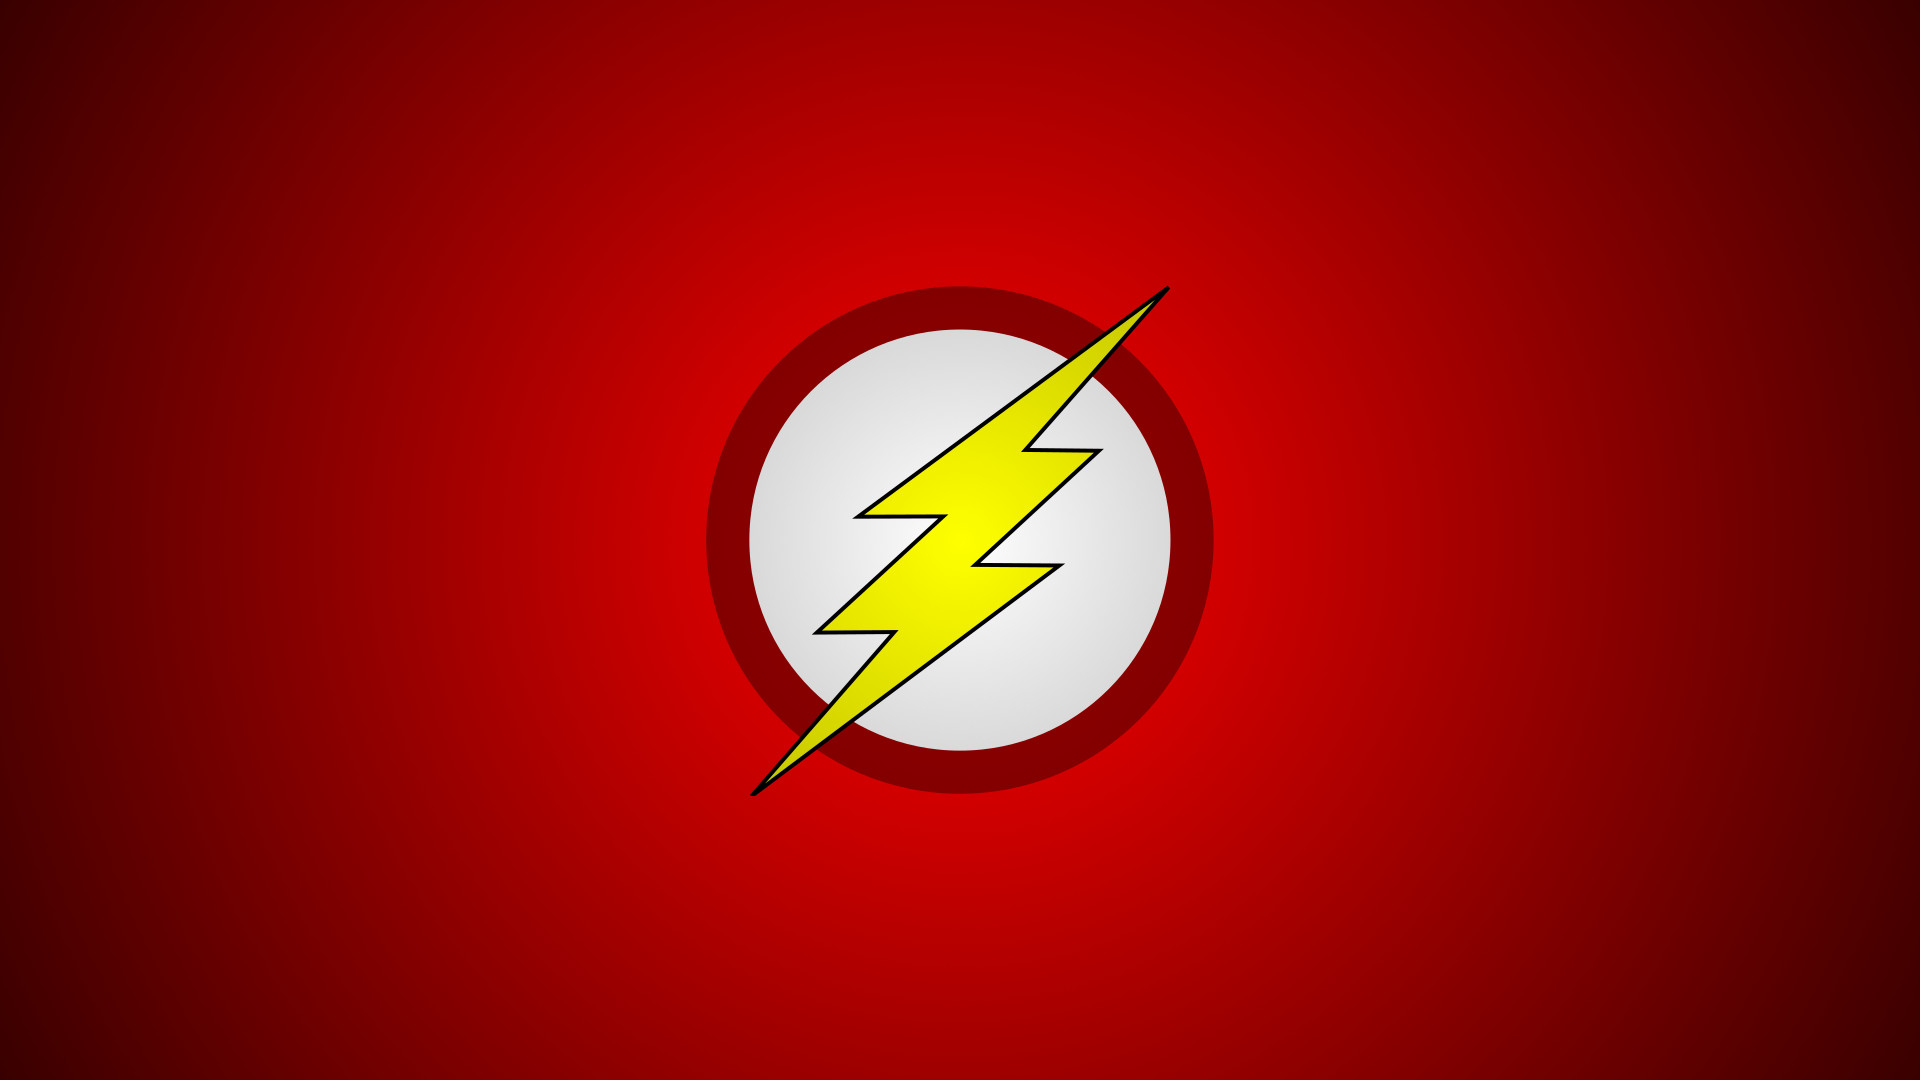 reverse flash wallpaper iphone,red,logo,yellow,font,graphic design